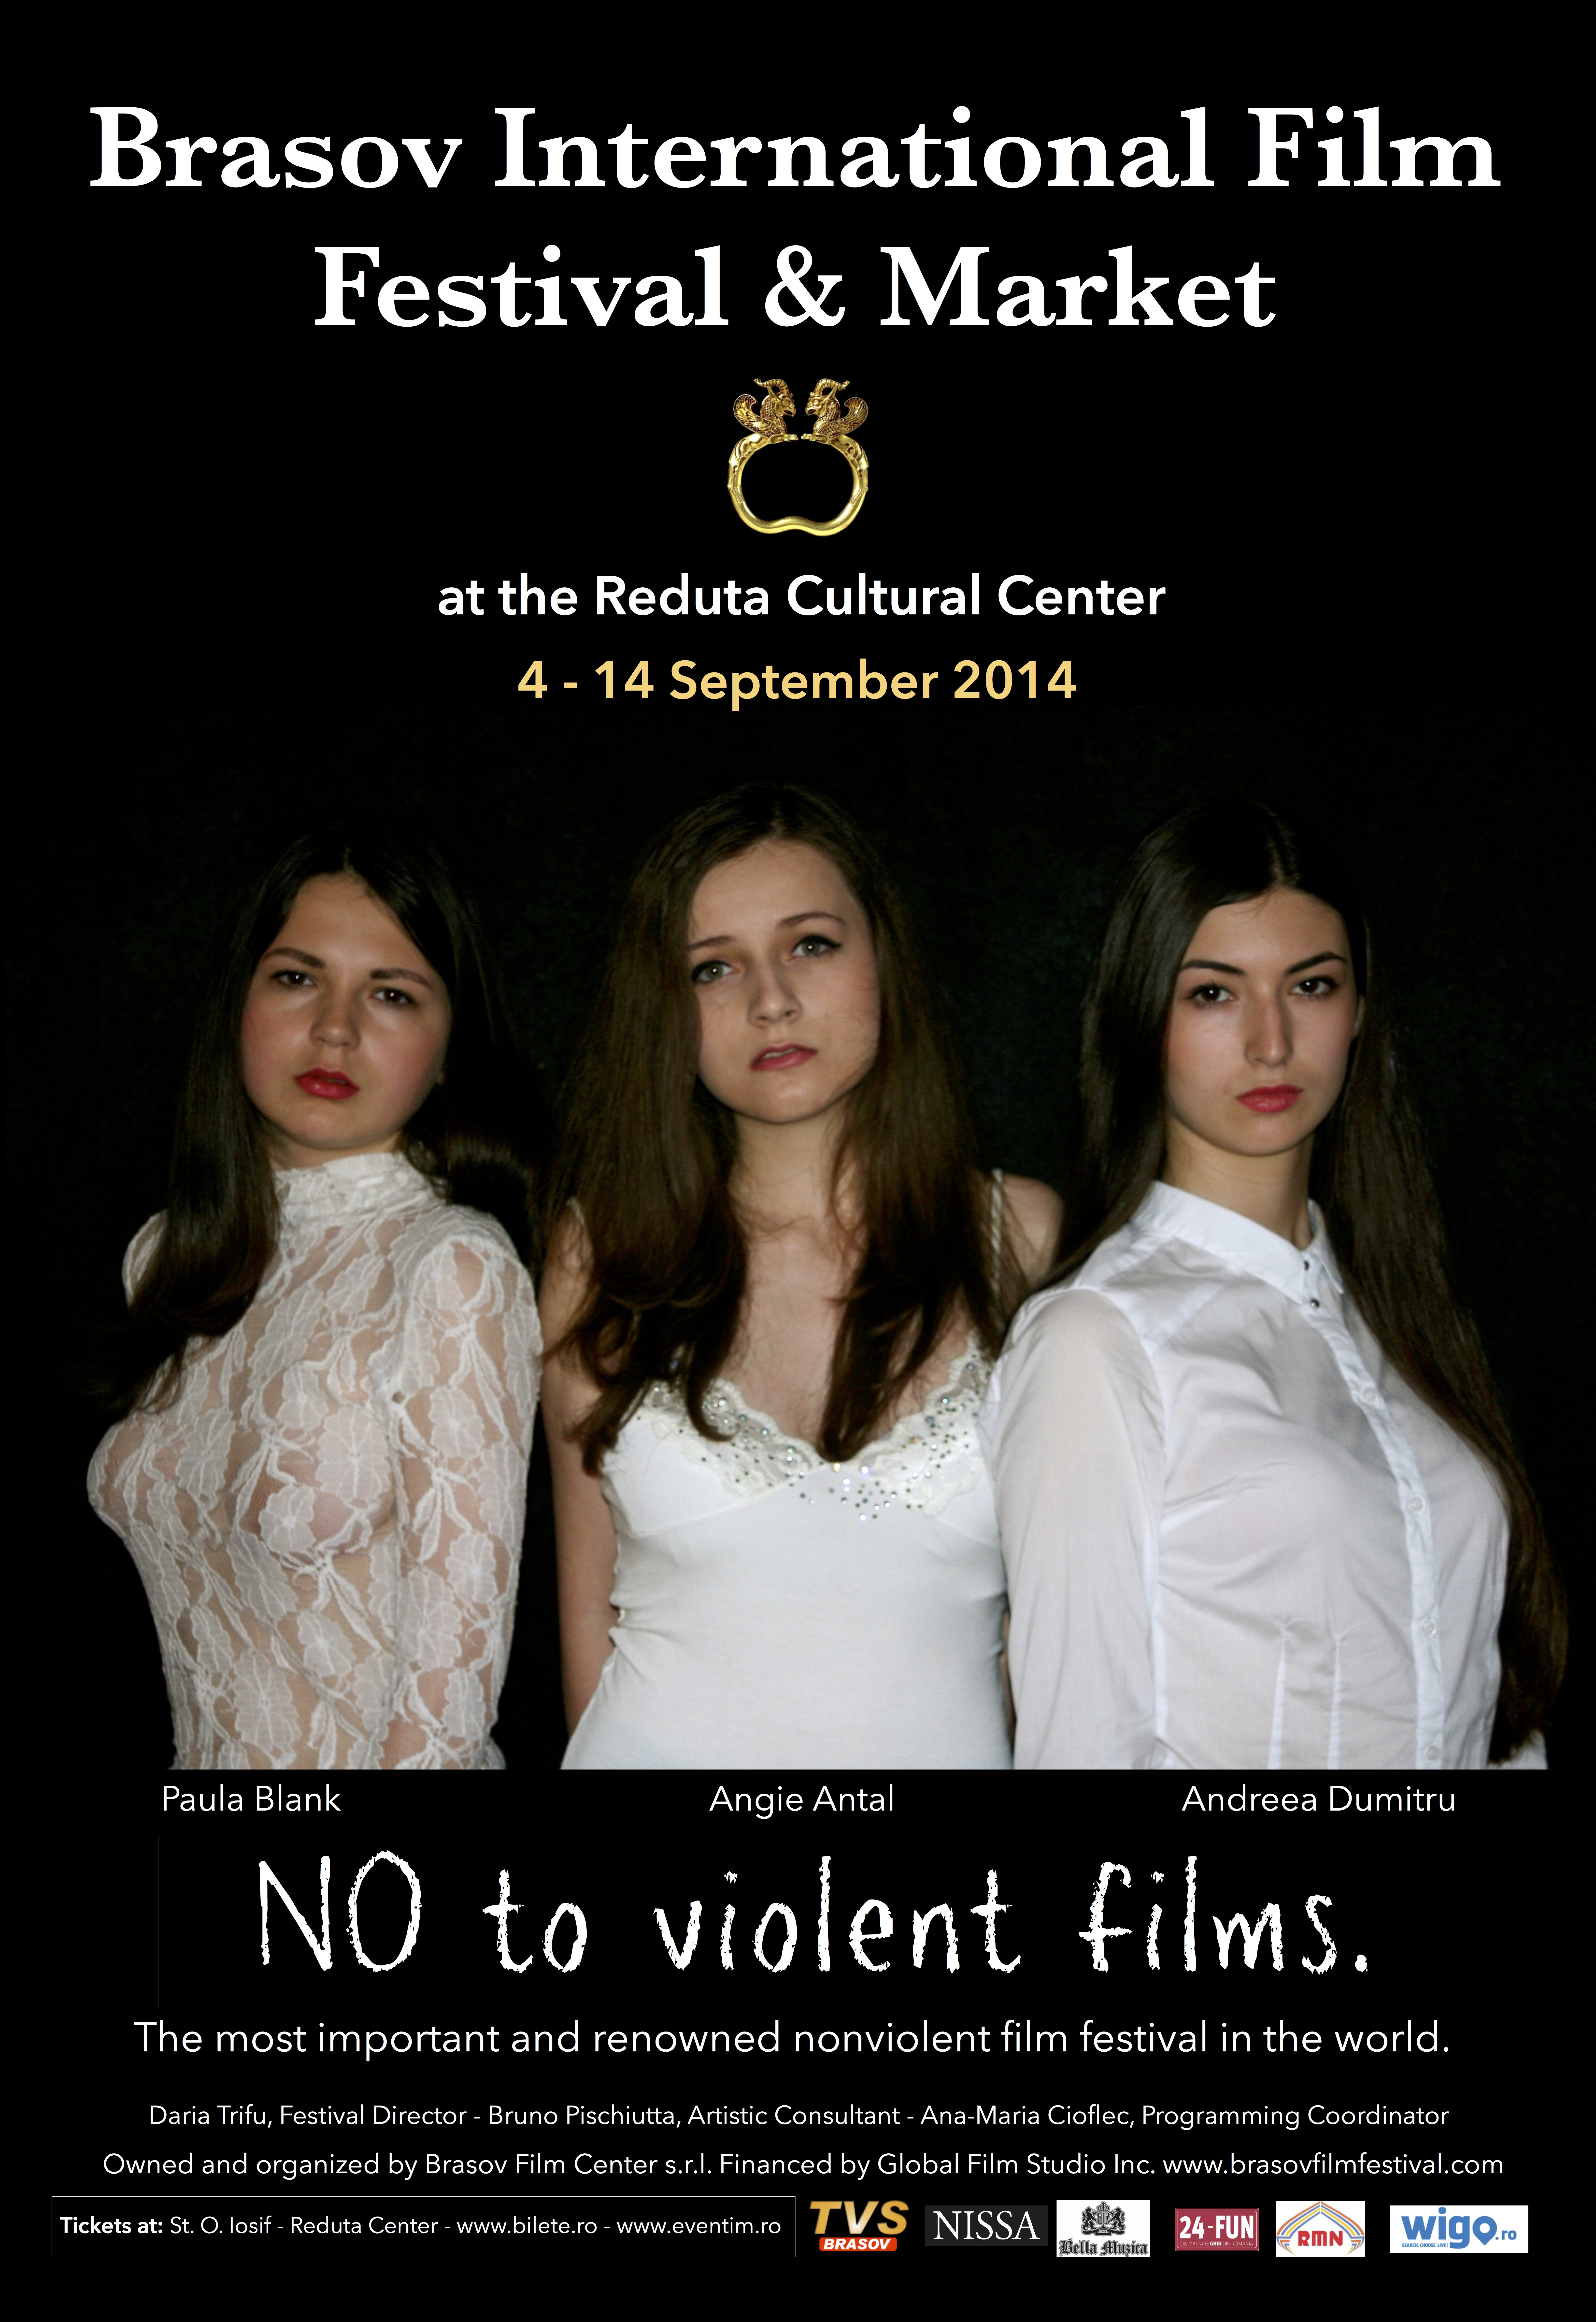 Official poster of the 2014 edition of the Brasov International Film Festival & Market (www.brasovfilmfestival.com). Photo by Bruno Pischiutta; Graphic design by Daria Trifu; Featuring Actresses Paula Blank, Angie Antal and Andreea Dumitru.